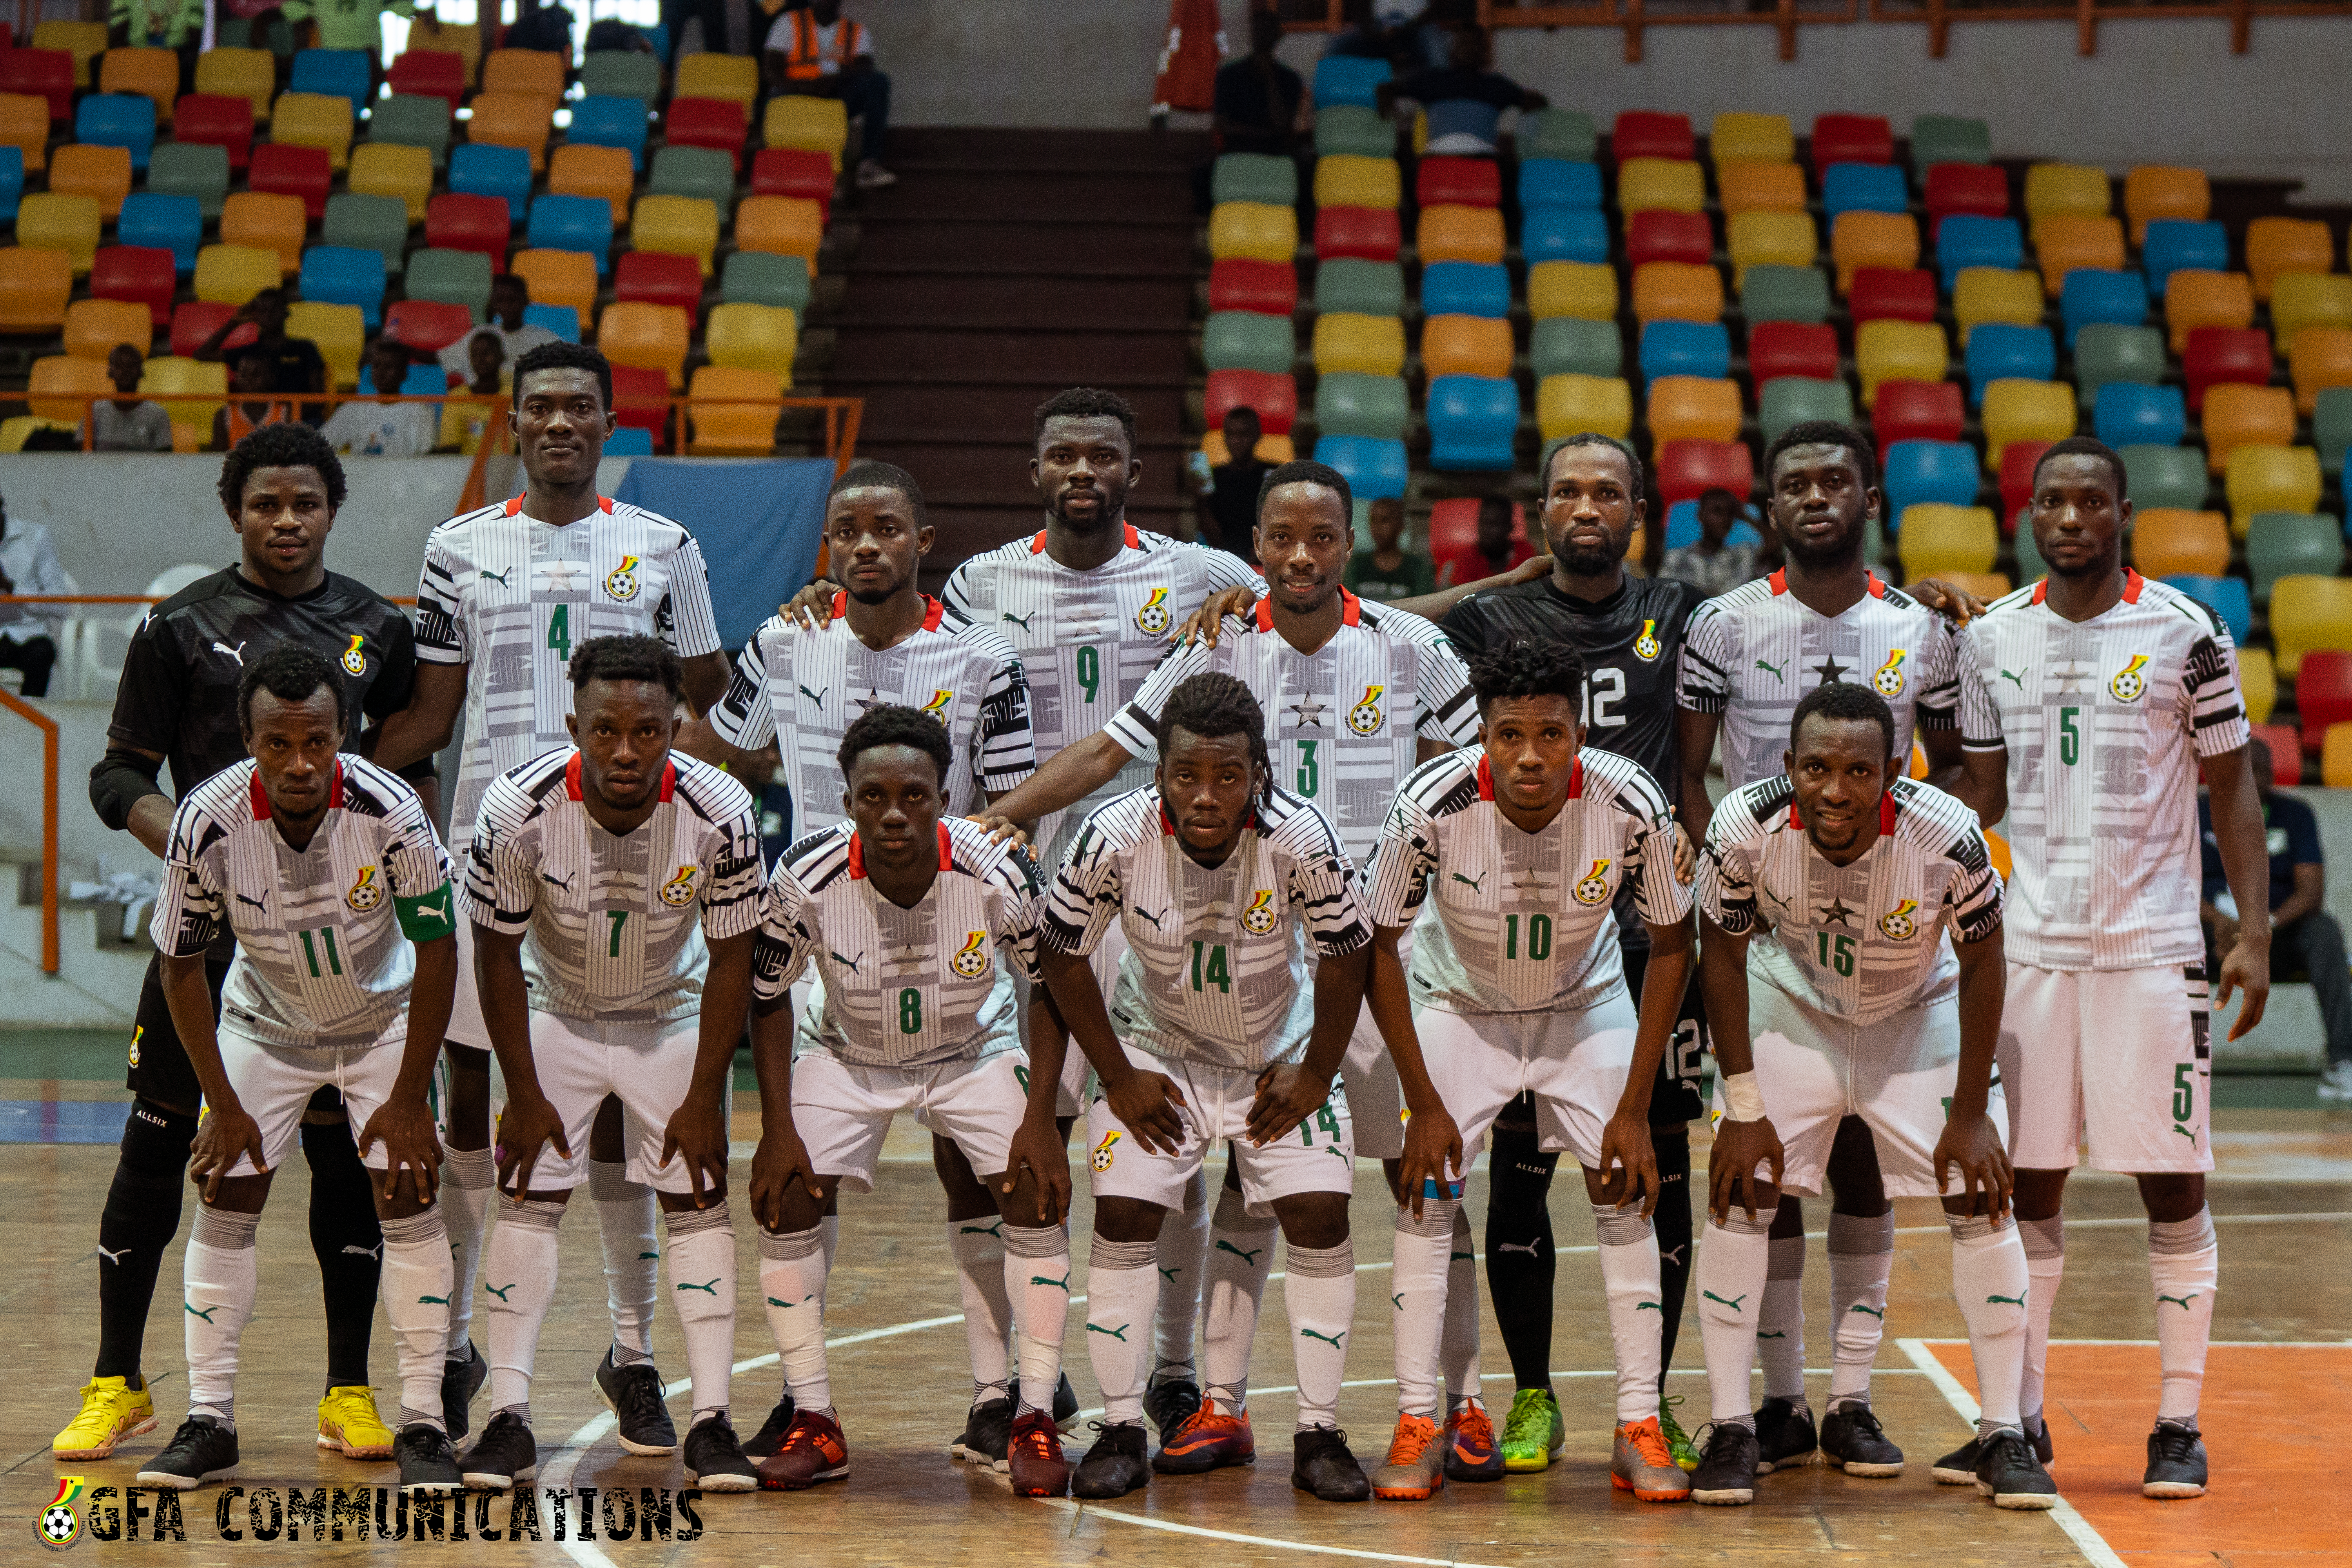 Our aim is to play at FIFA Futsal World Cup – Ghana coach Philip Boakye